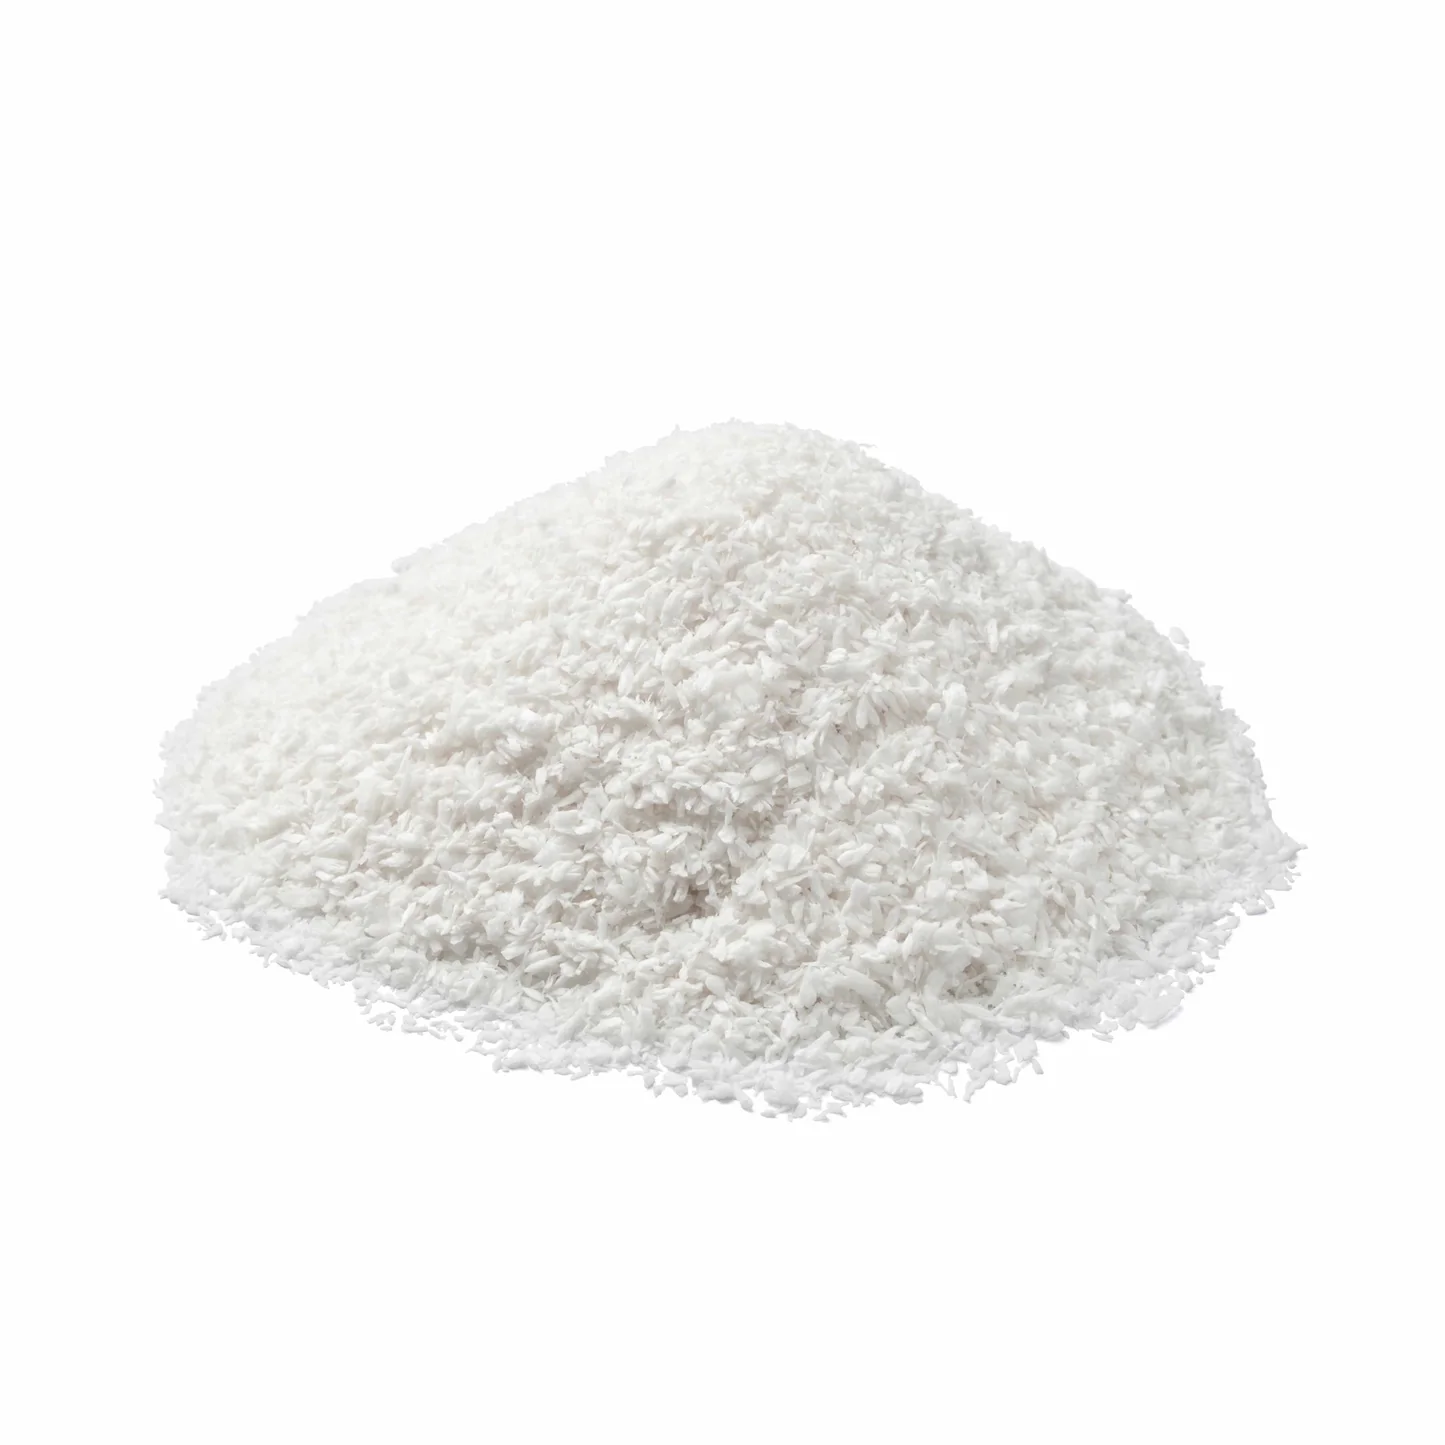 Stearic Acid (C18 50% - 60%) in Chemtradeasia